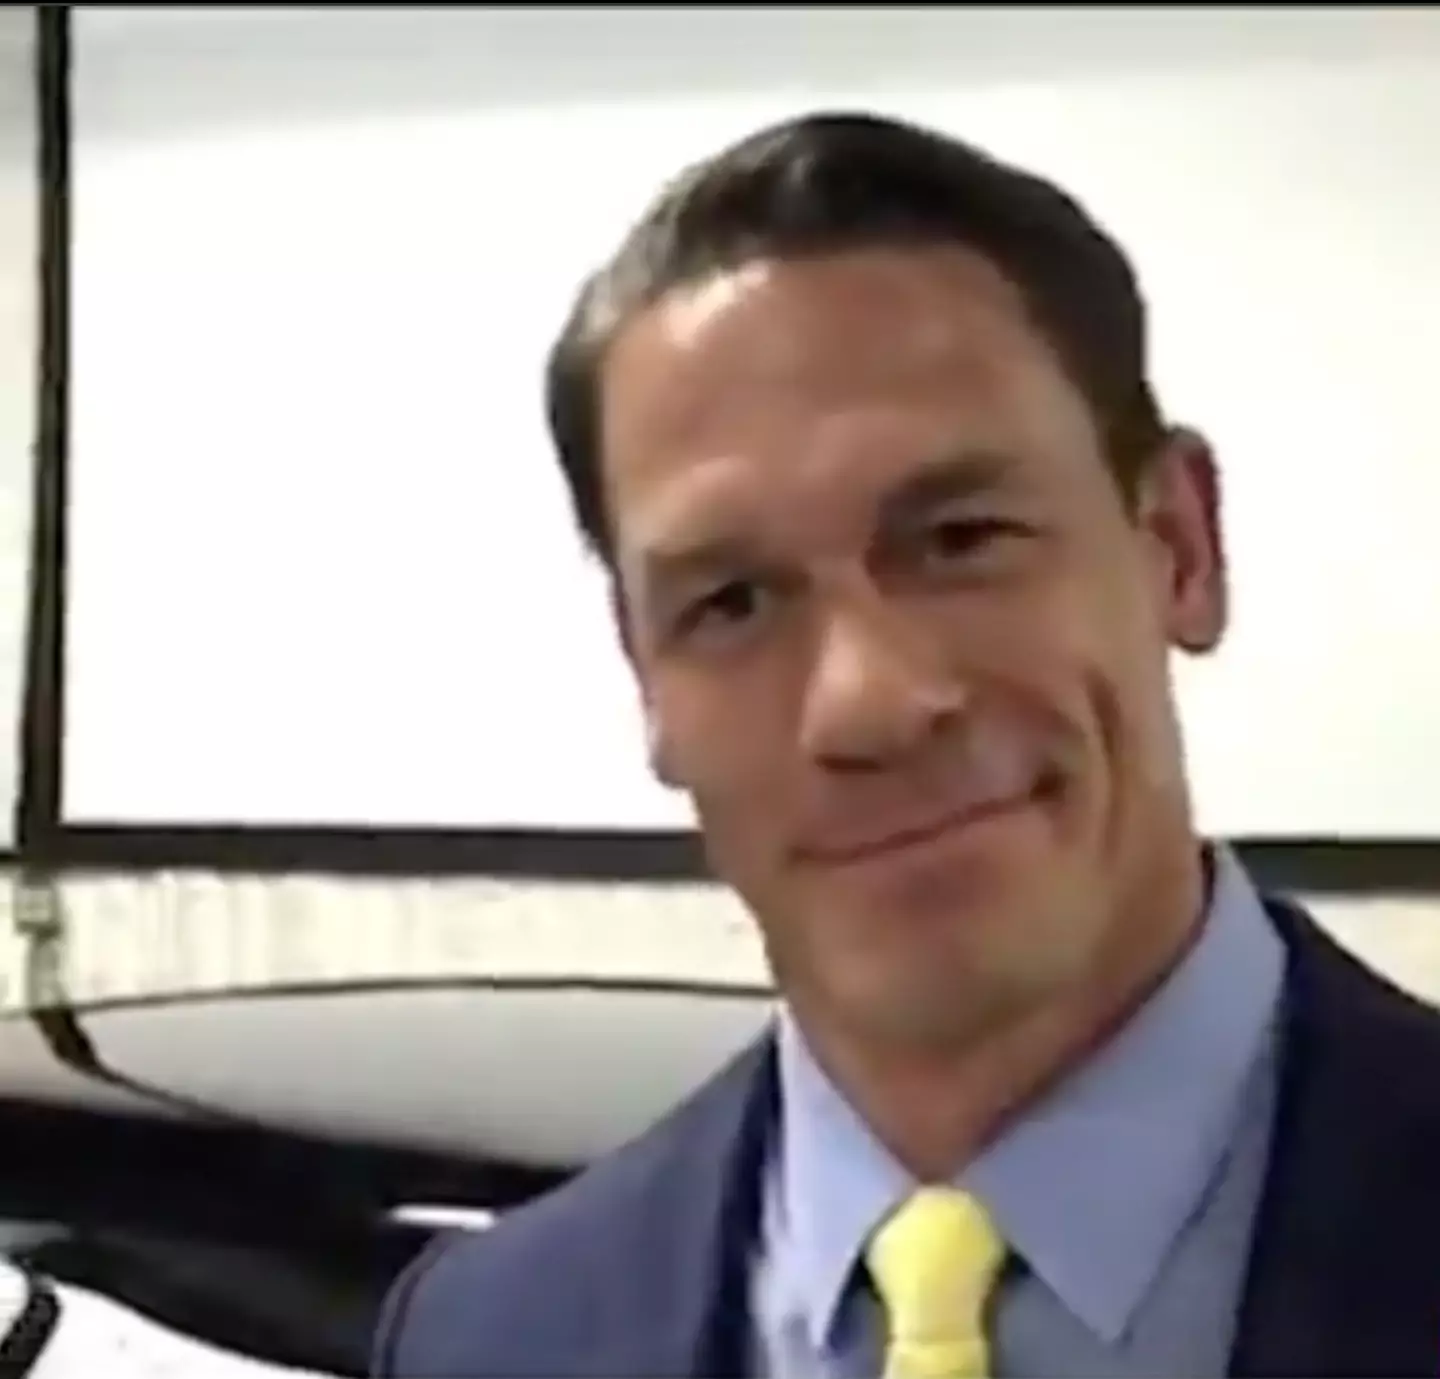 John Cena appearing in the video.